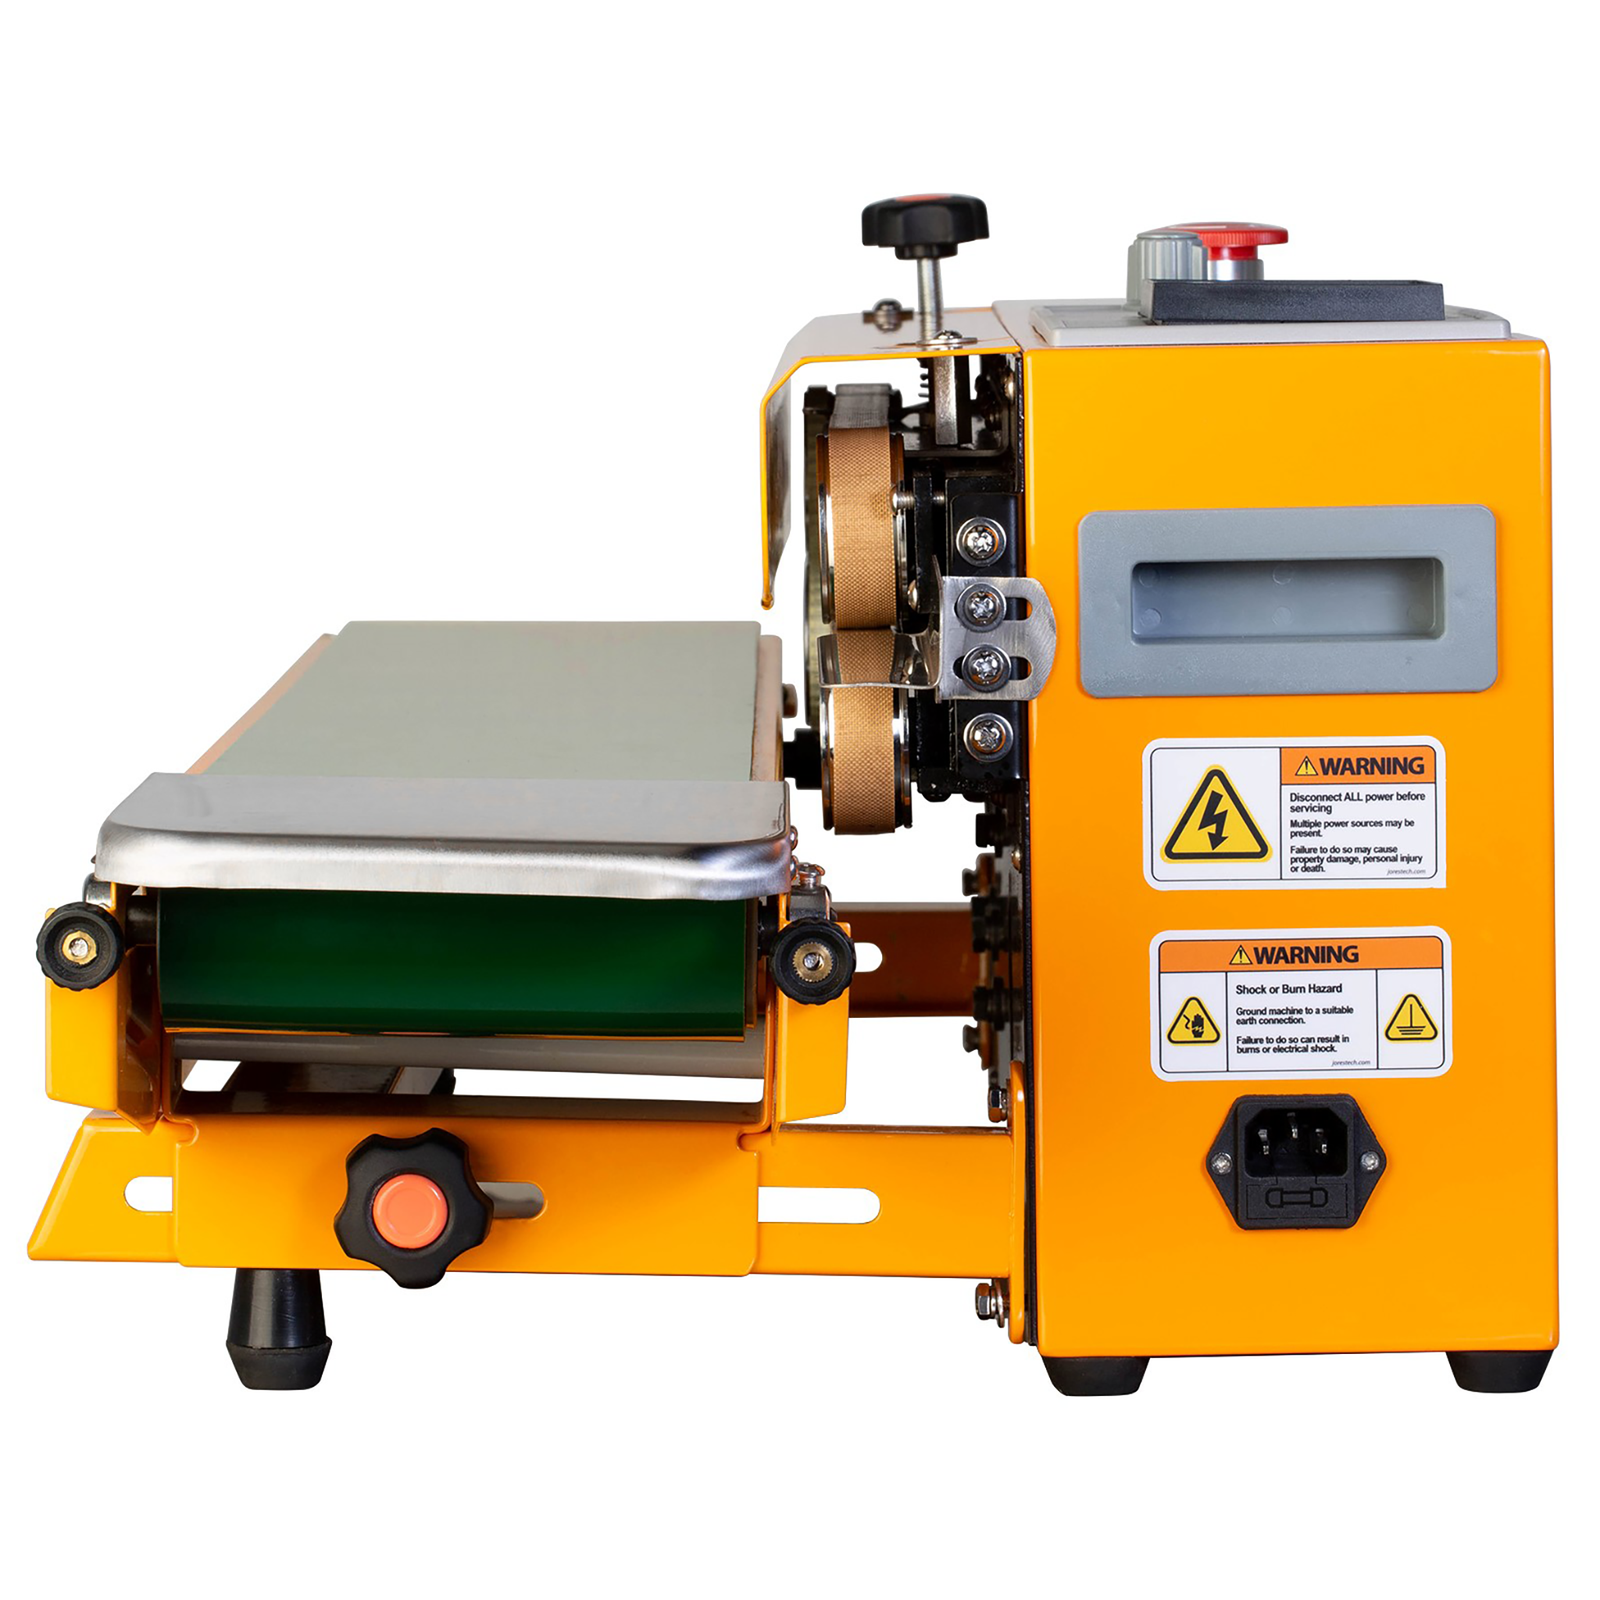 side view of the yellow JORES TECHNOLOGIES® continuous band sealing machine with green revolving band. Machine is set for horizontal sealing applications